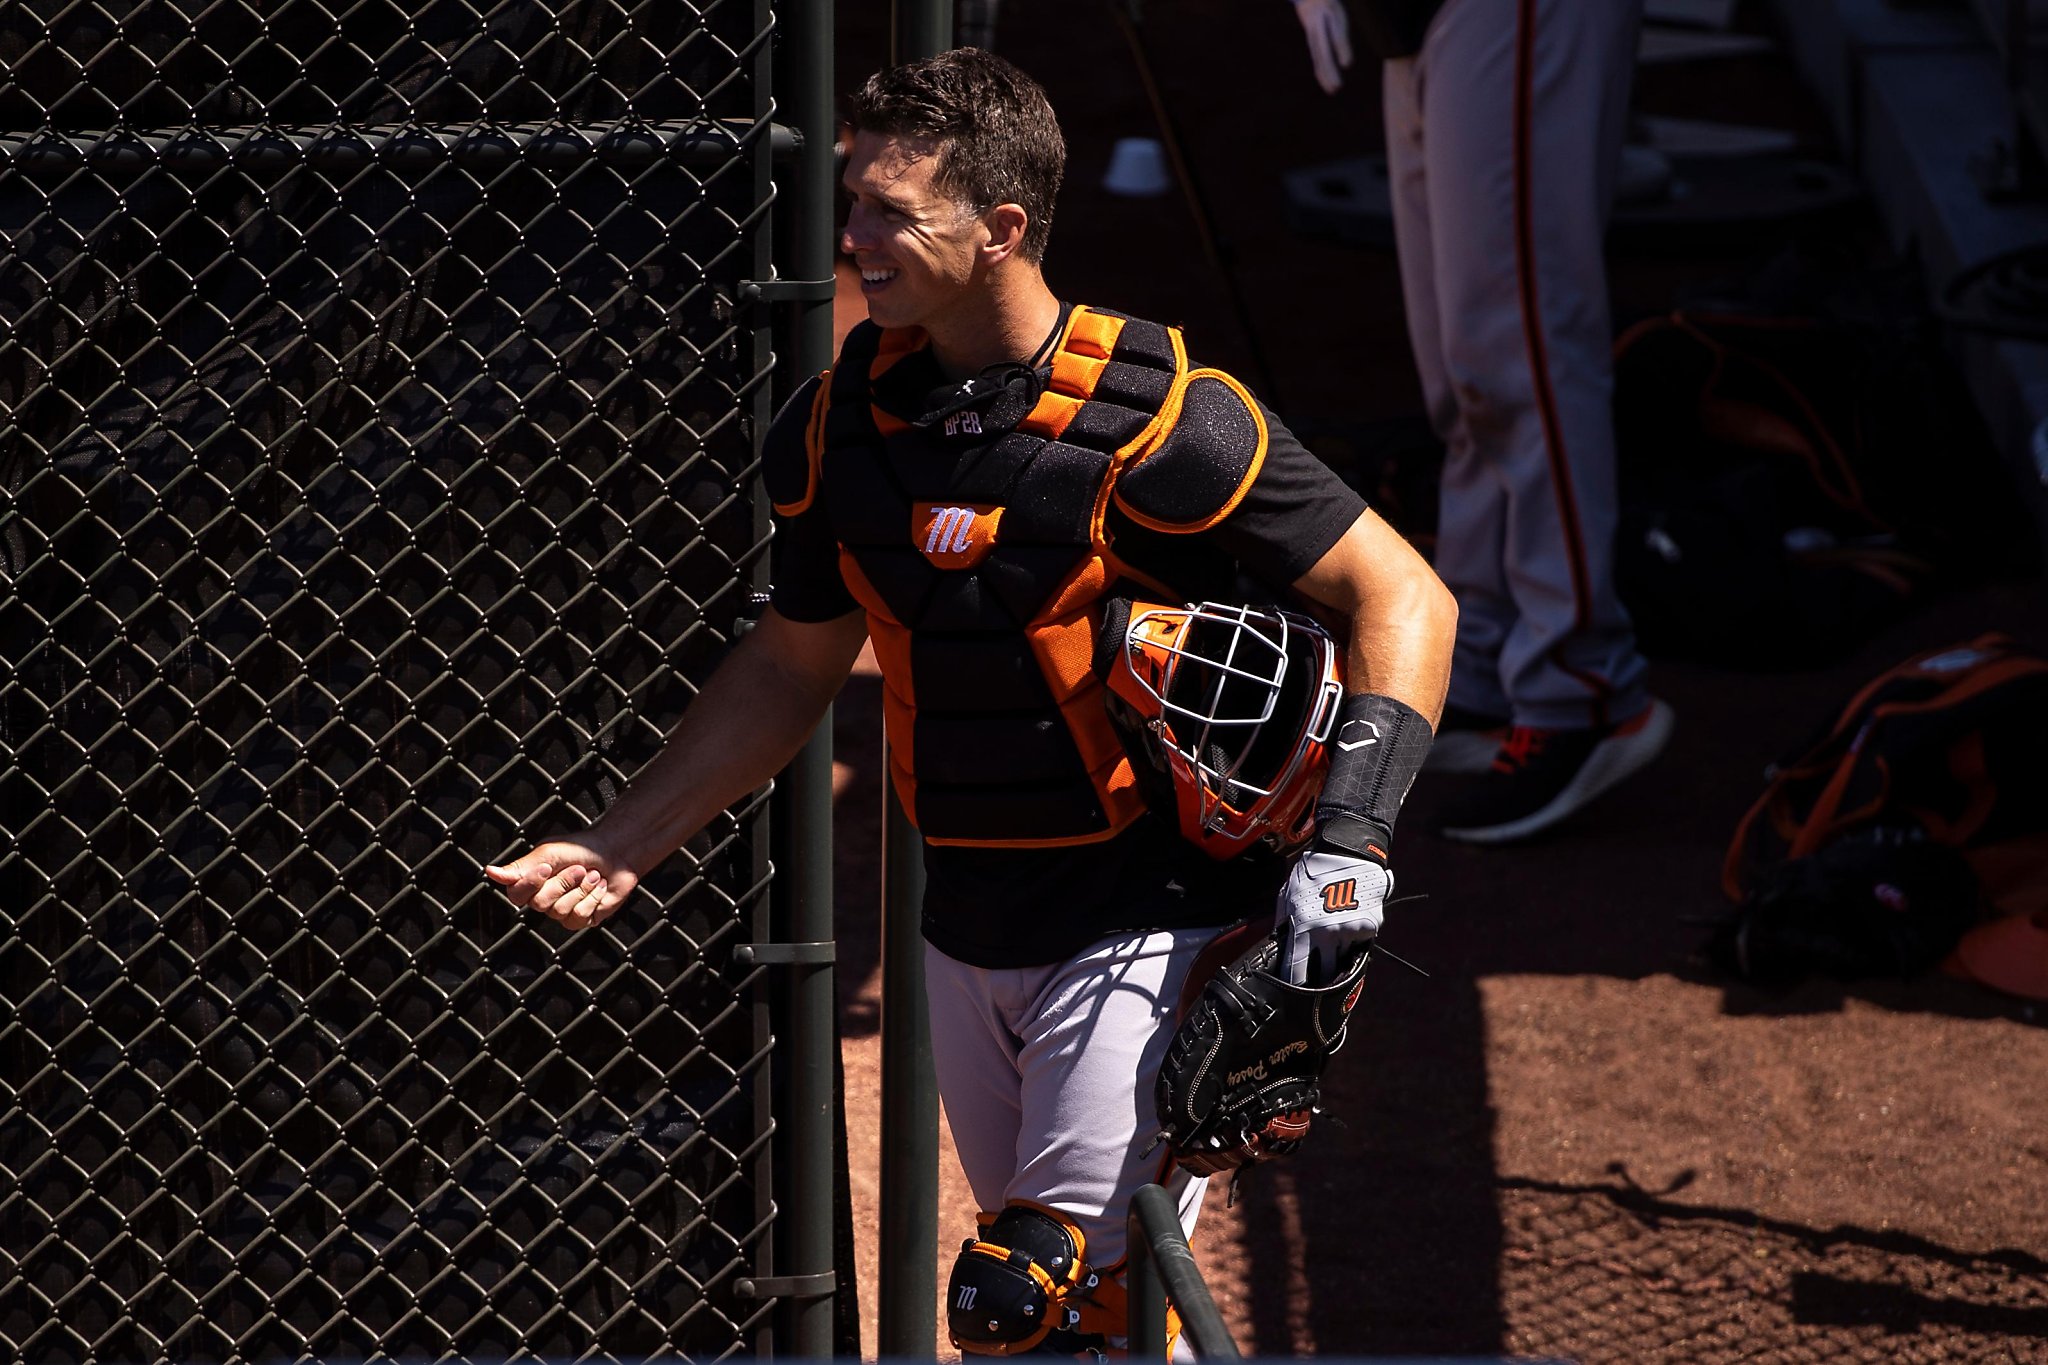 Giants' Buster Posey Won't Play in 2020 MLB Season Due to Twin